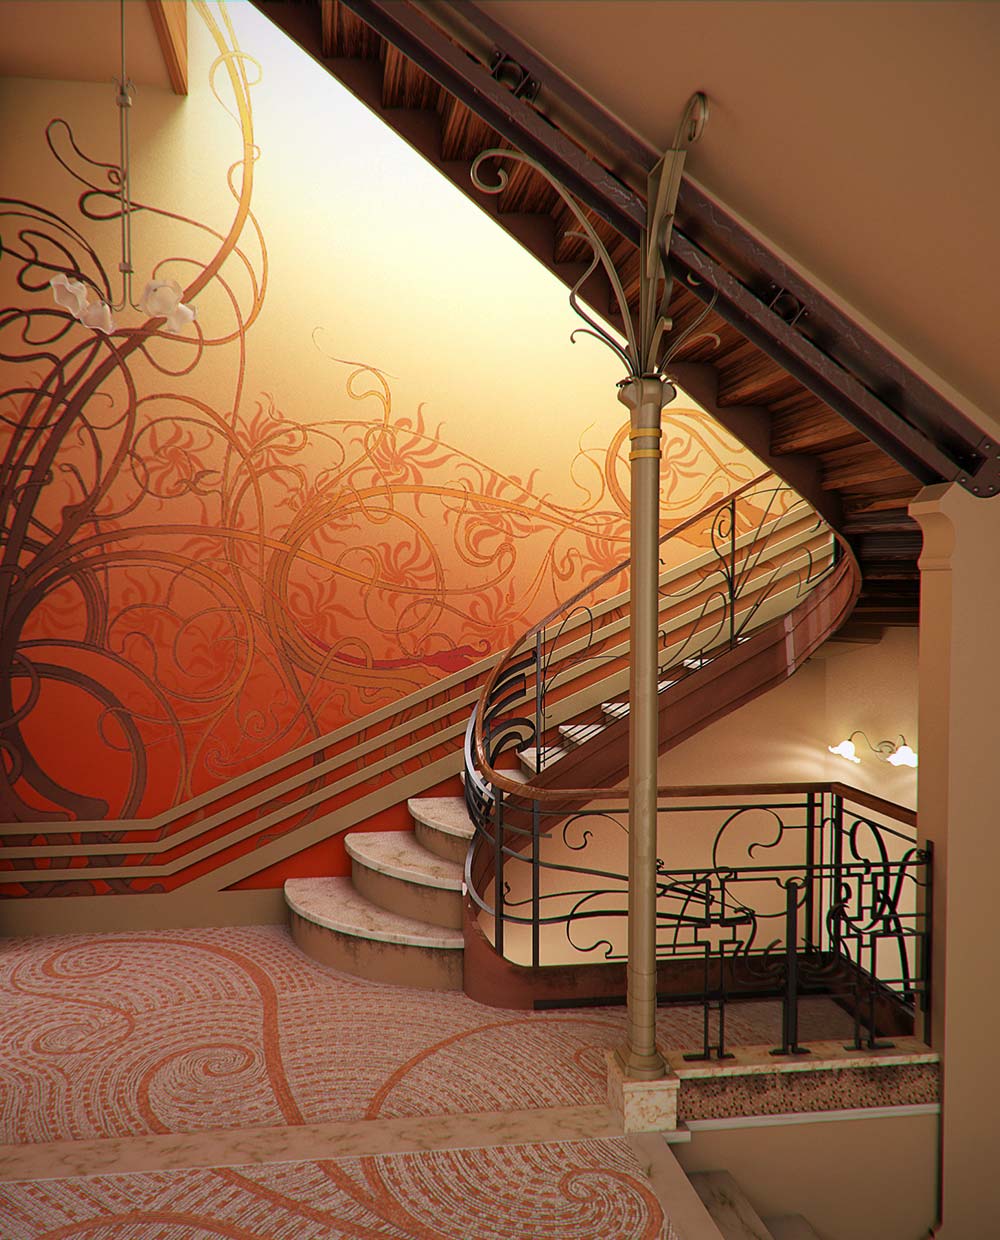 Horta-designed Hôtel Tassel, which is known as the world’s first building in the Art Nouveau style